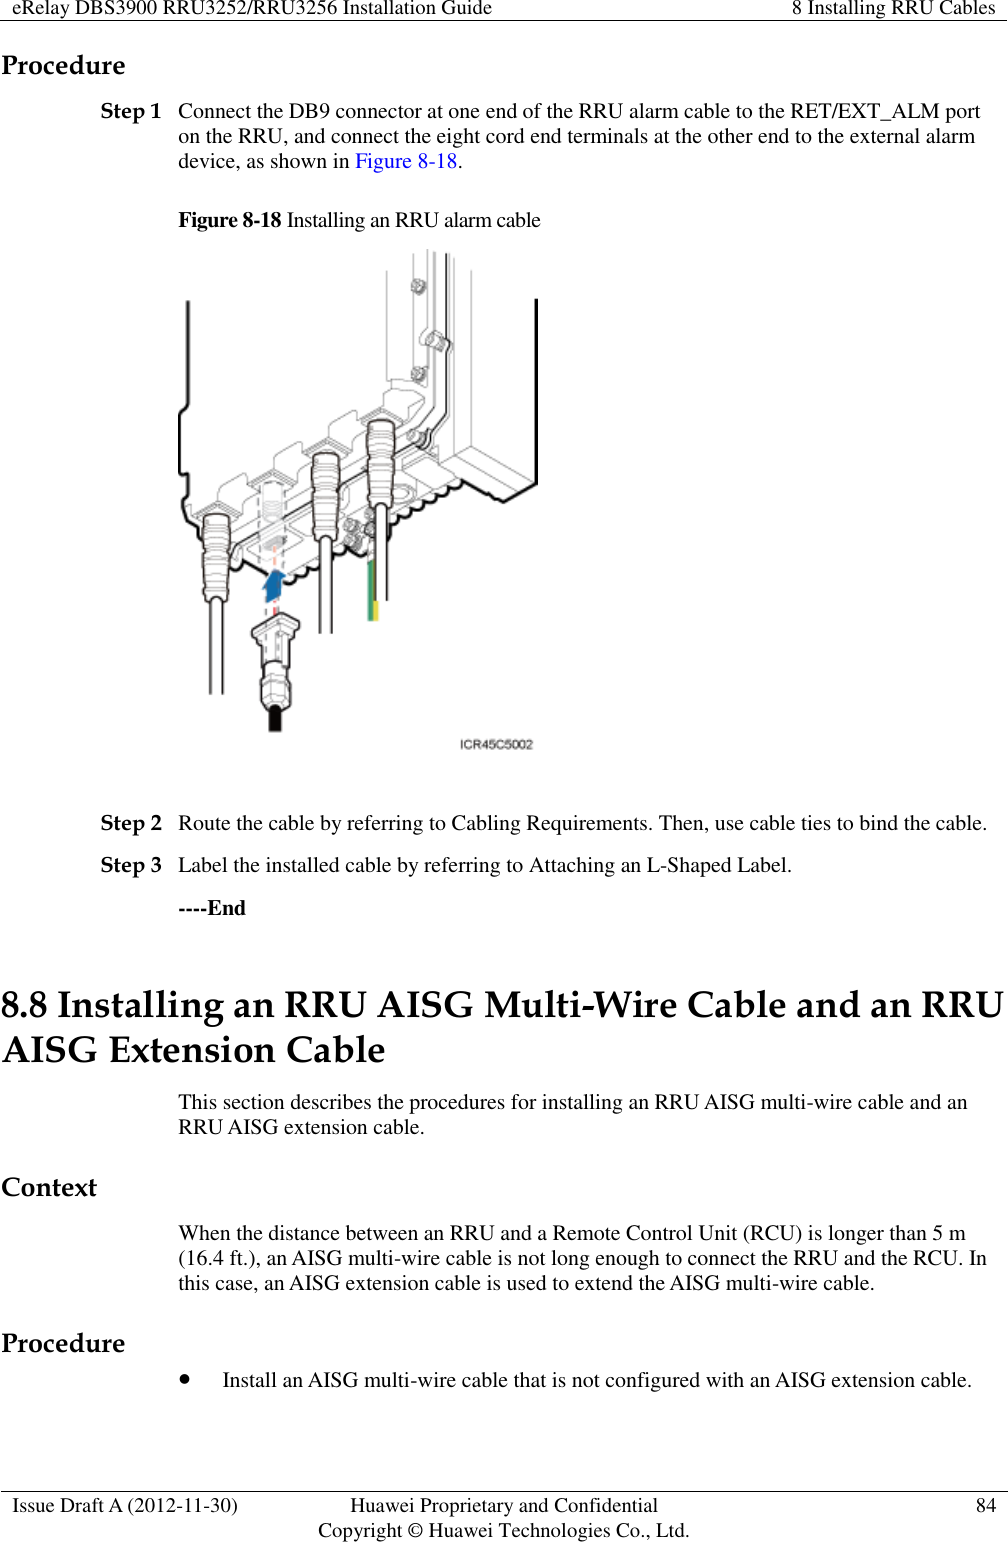 eRelay DBS3900 RRU3252/RRU3256 Installation Guide 8 Installing RRU Cables  Issue Draft A (2012-11-30) Huawei Proprietary and Confidential                                     Copyright © Huawei Technologies Co., Ltd. 84  Procedure Step 1 Connect the DB9 connector at one end of the RRU alarm cable to the RET/EXT_ALM port on the RRU, and connect the eight cord end terminals at the other end to the external alarm device, as shown in Figure 8-18. Figure 8-18 Installing an RRU alarm cable   Step 2 Route the cable by referring to Cabling Requirements. Then, use cable ties to bind the cable. Step 3 Label the installed cable by referring to Attaching an L-Shaped Label. ----End 8.8 Installing an RRU AISG Multi-Wire Cable and an RRU AISG Extension Cable This section describes the procedures for installing an RRU AISG multi-wire cable and an RRU AISG extension cable. Context When the distance between an RRU and a Remote Control Unit (RCU) is longer than 5 m (16.4 ft.), an AISG multi-wire cable is not long enough to connect the RRU and the RCU. In this case, an AISG extension cable is used to extend the AISG multi-wire cable. Procedure  Install an AISG multi-wire cable that is not configured with an AISG extension cable. 